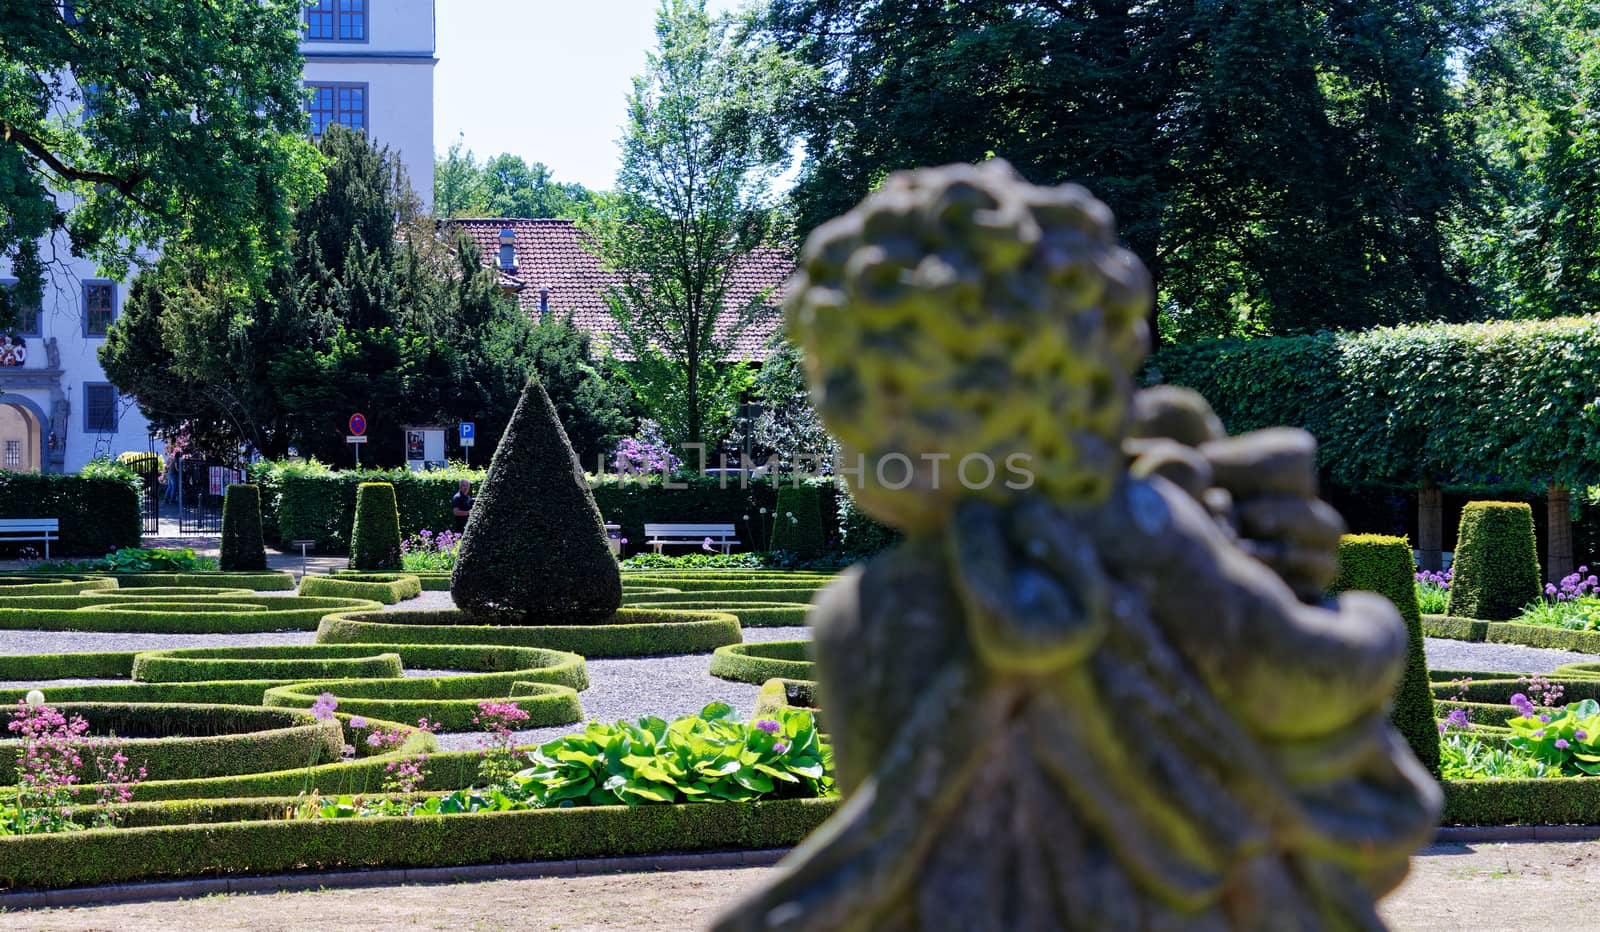 Baroque garden with a deliberately blurred stone figure in the foreground by geogif